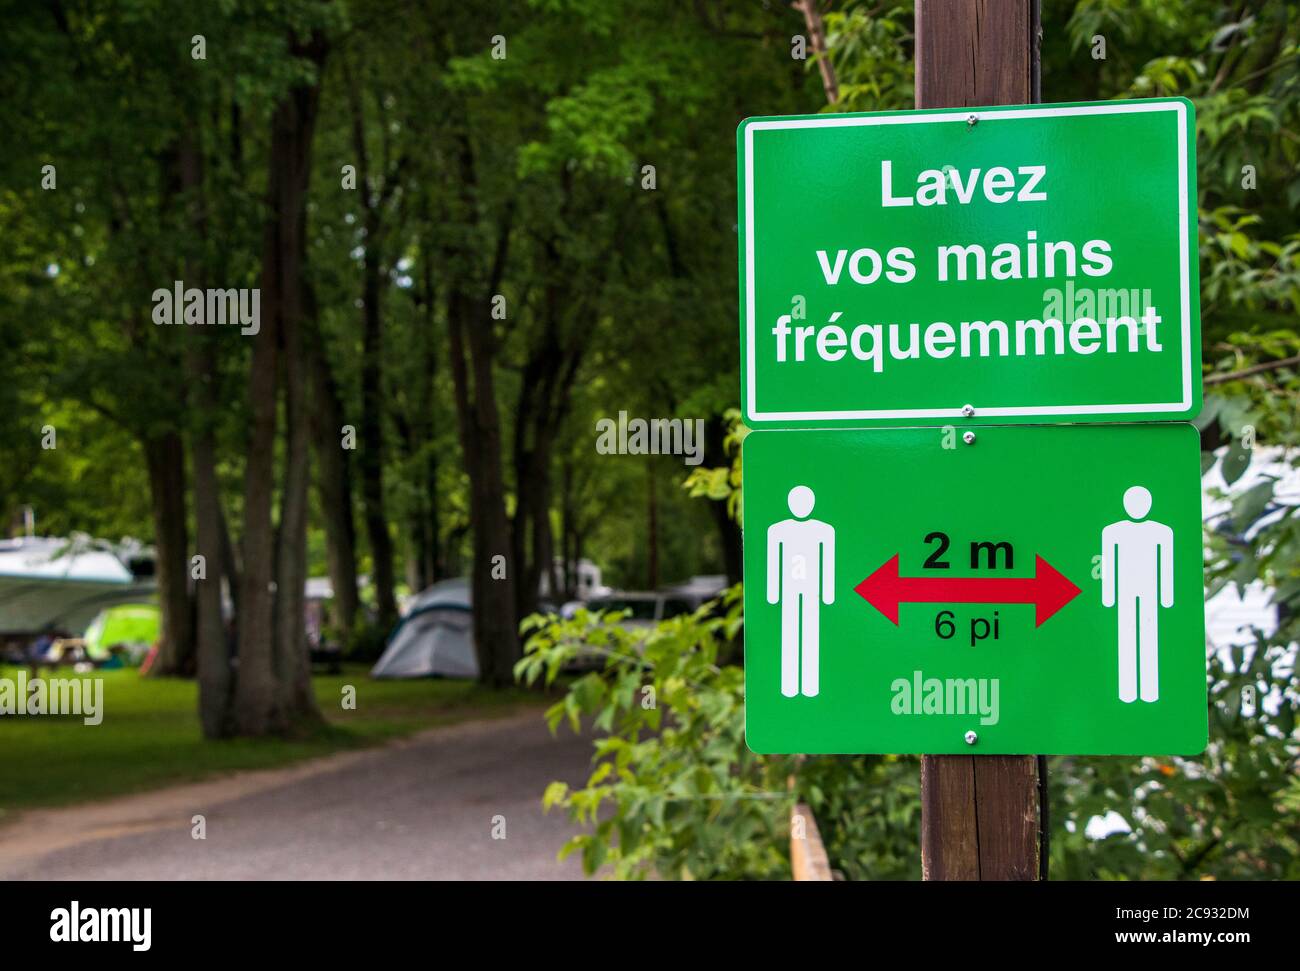 July 26, 2020 - Roxton Falls, Qc, Canada: Social distancing and 'Wash your hands' in French Road Signs on a campground, COVID-19 Coronavirus Pandemic Stock Photo